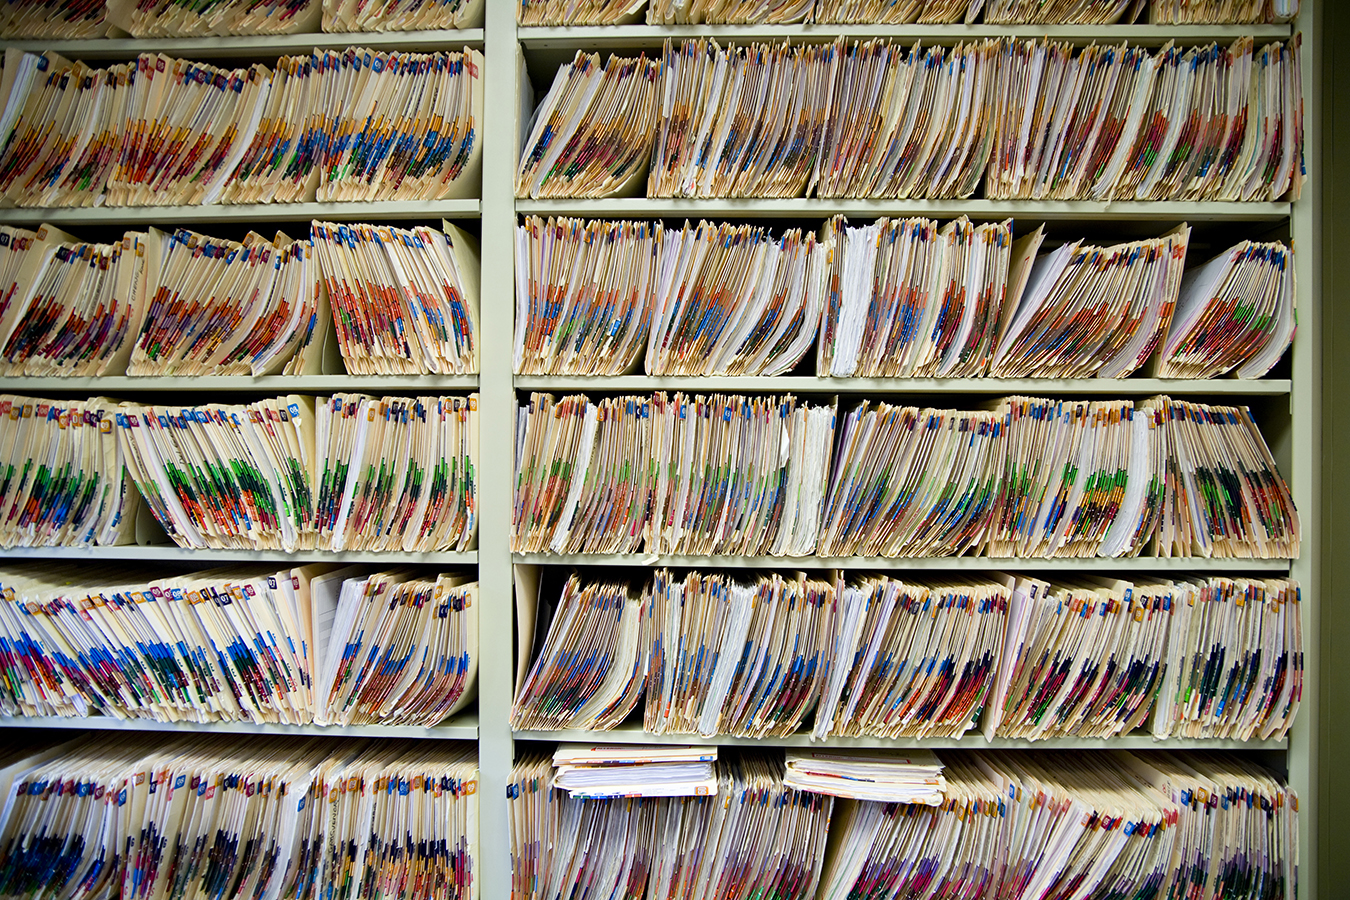 Startup Seeks To Hold Doctors, Hospitals Accountable On Patient Record Requests